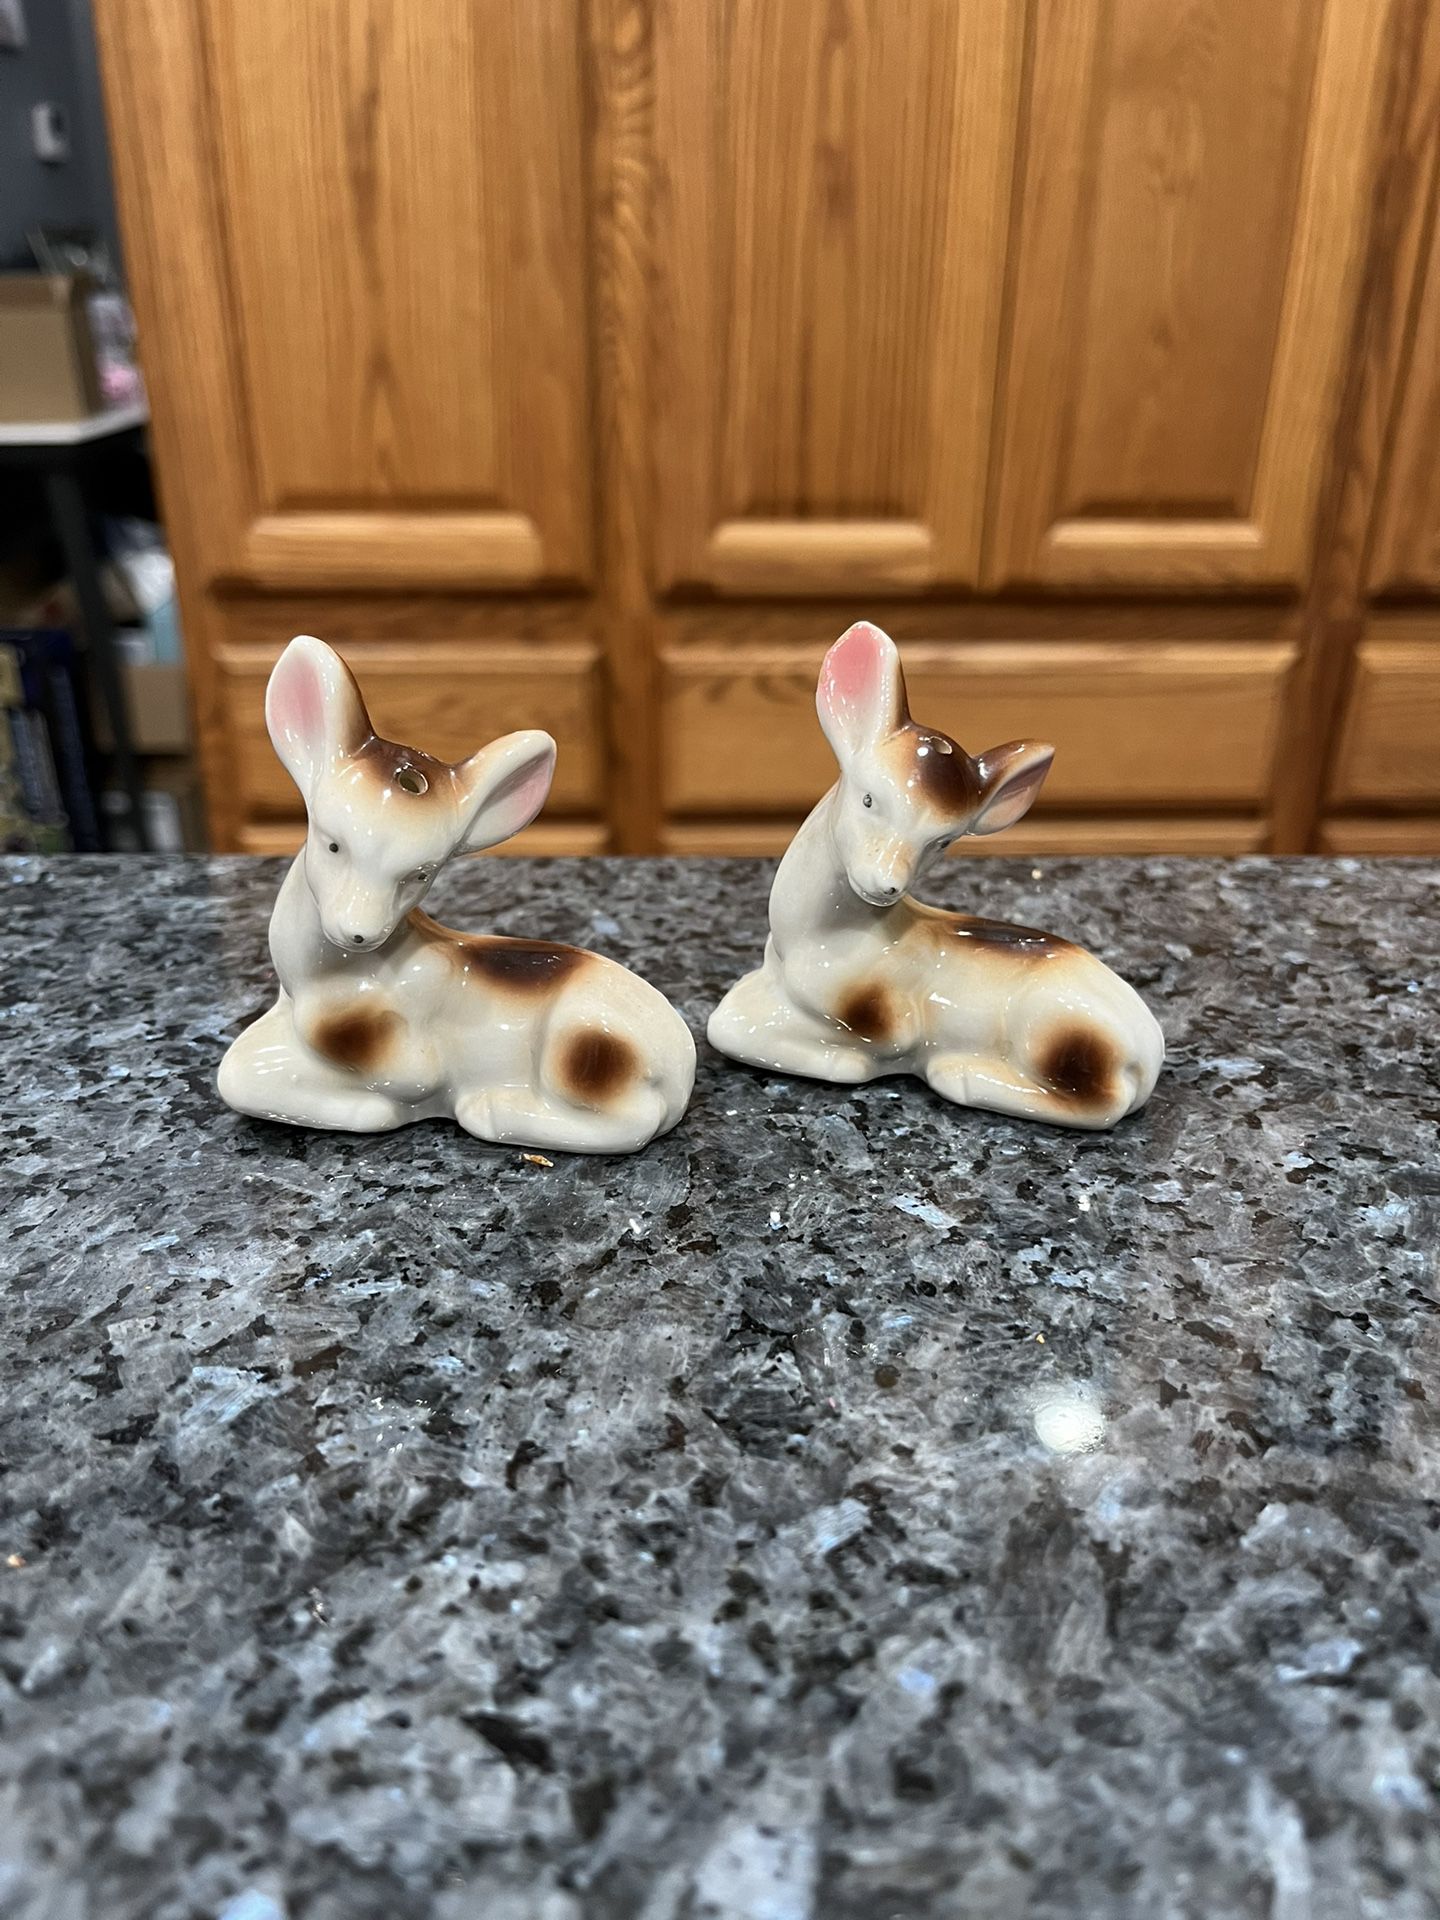 Vintage Japan 1950’s Deer Pair Of Salt And Pepper Shakers.  Preowned With Original Cork Stoppers.  